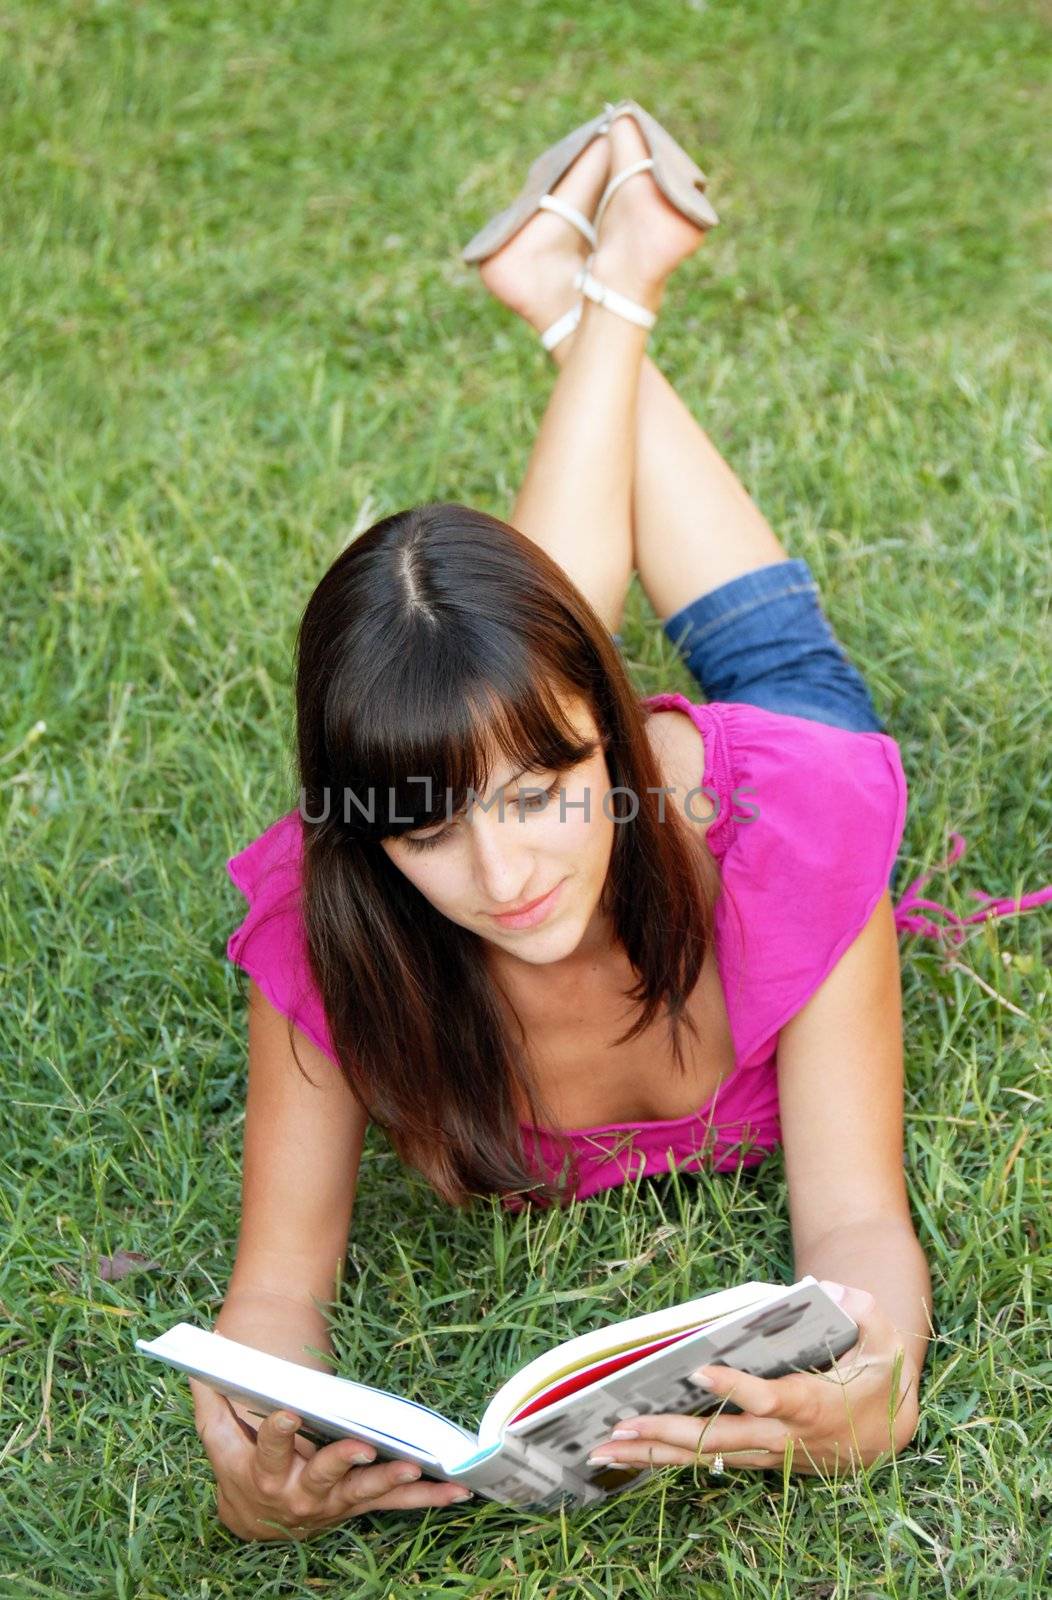 young woman lying reading a book in grass outdoor